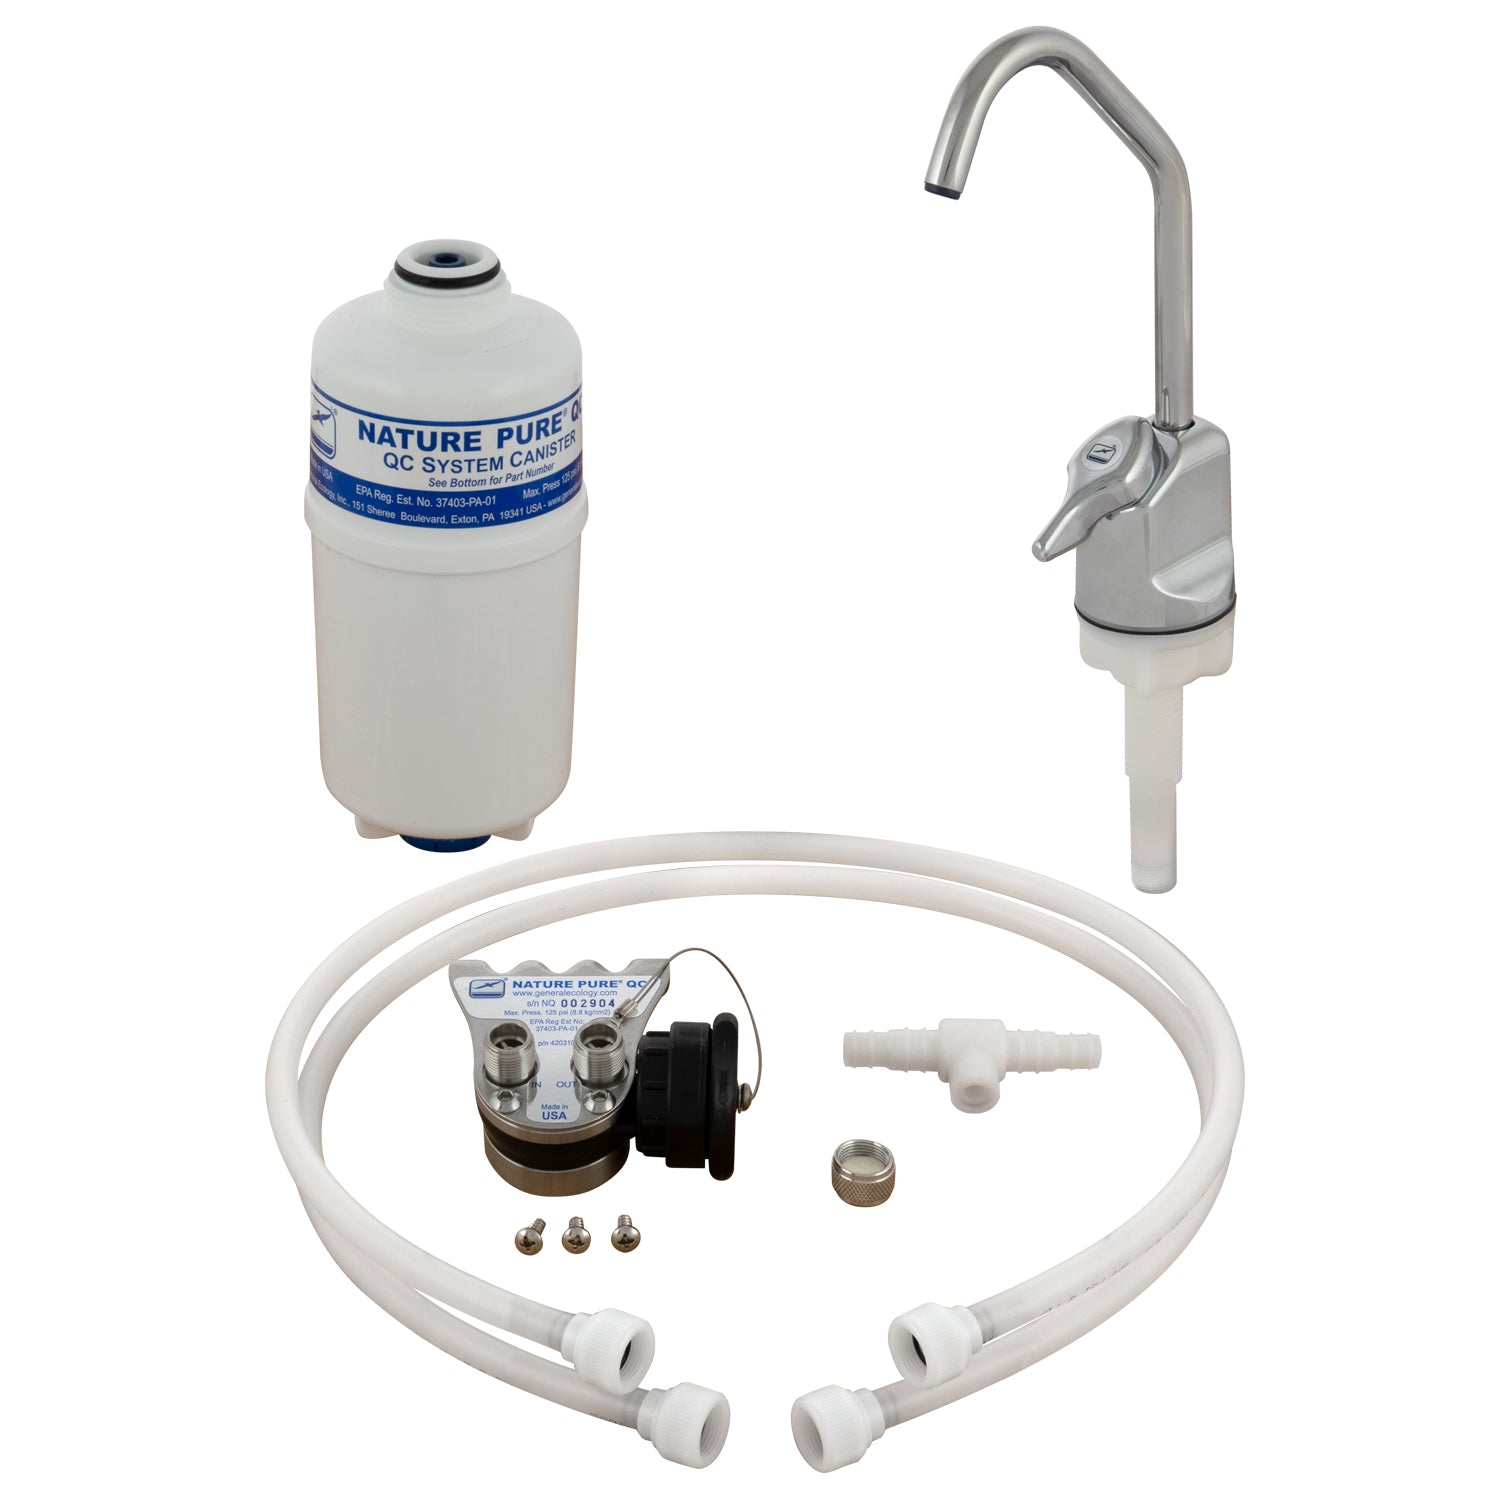 Nature Pure Rs2qc Faucet Drinking Water System General Ecology Inc